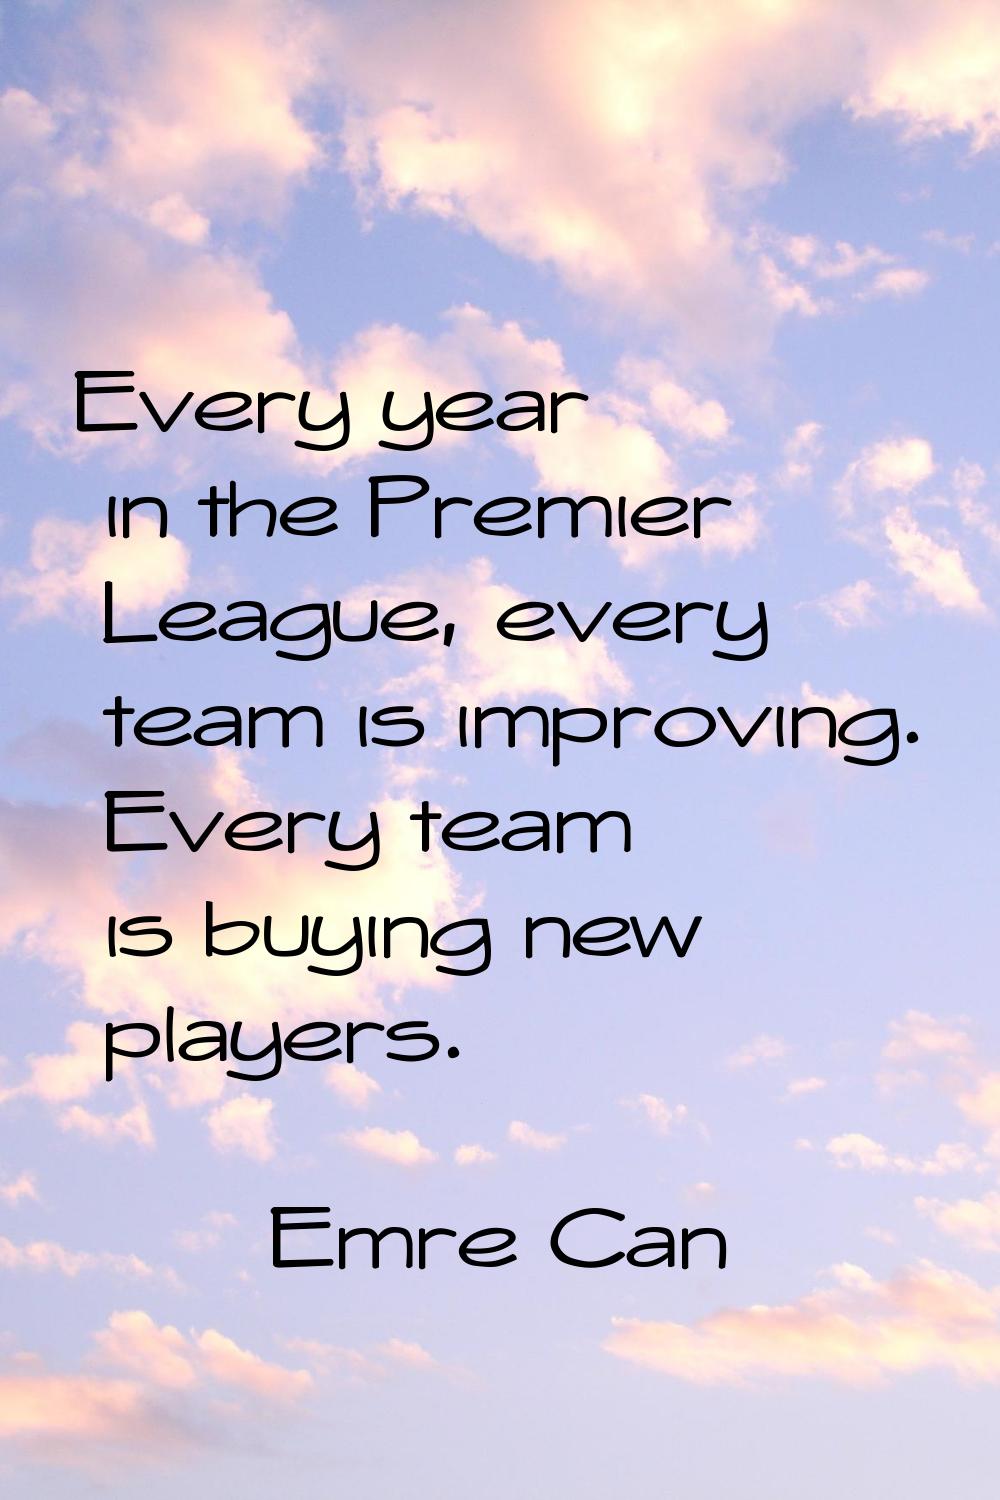 Every year in the Premier League, every team is improving. Every team is buying new players.